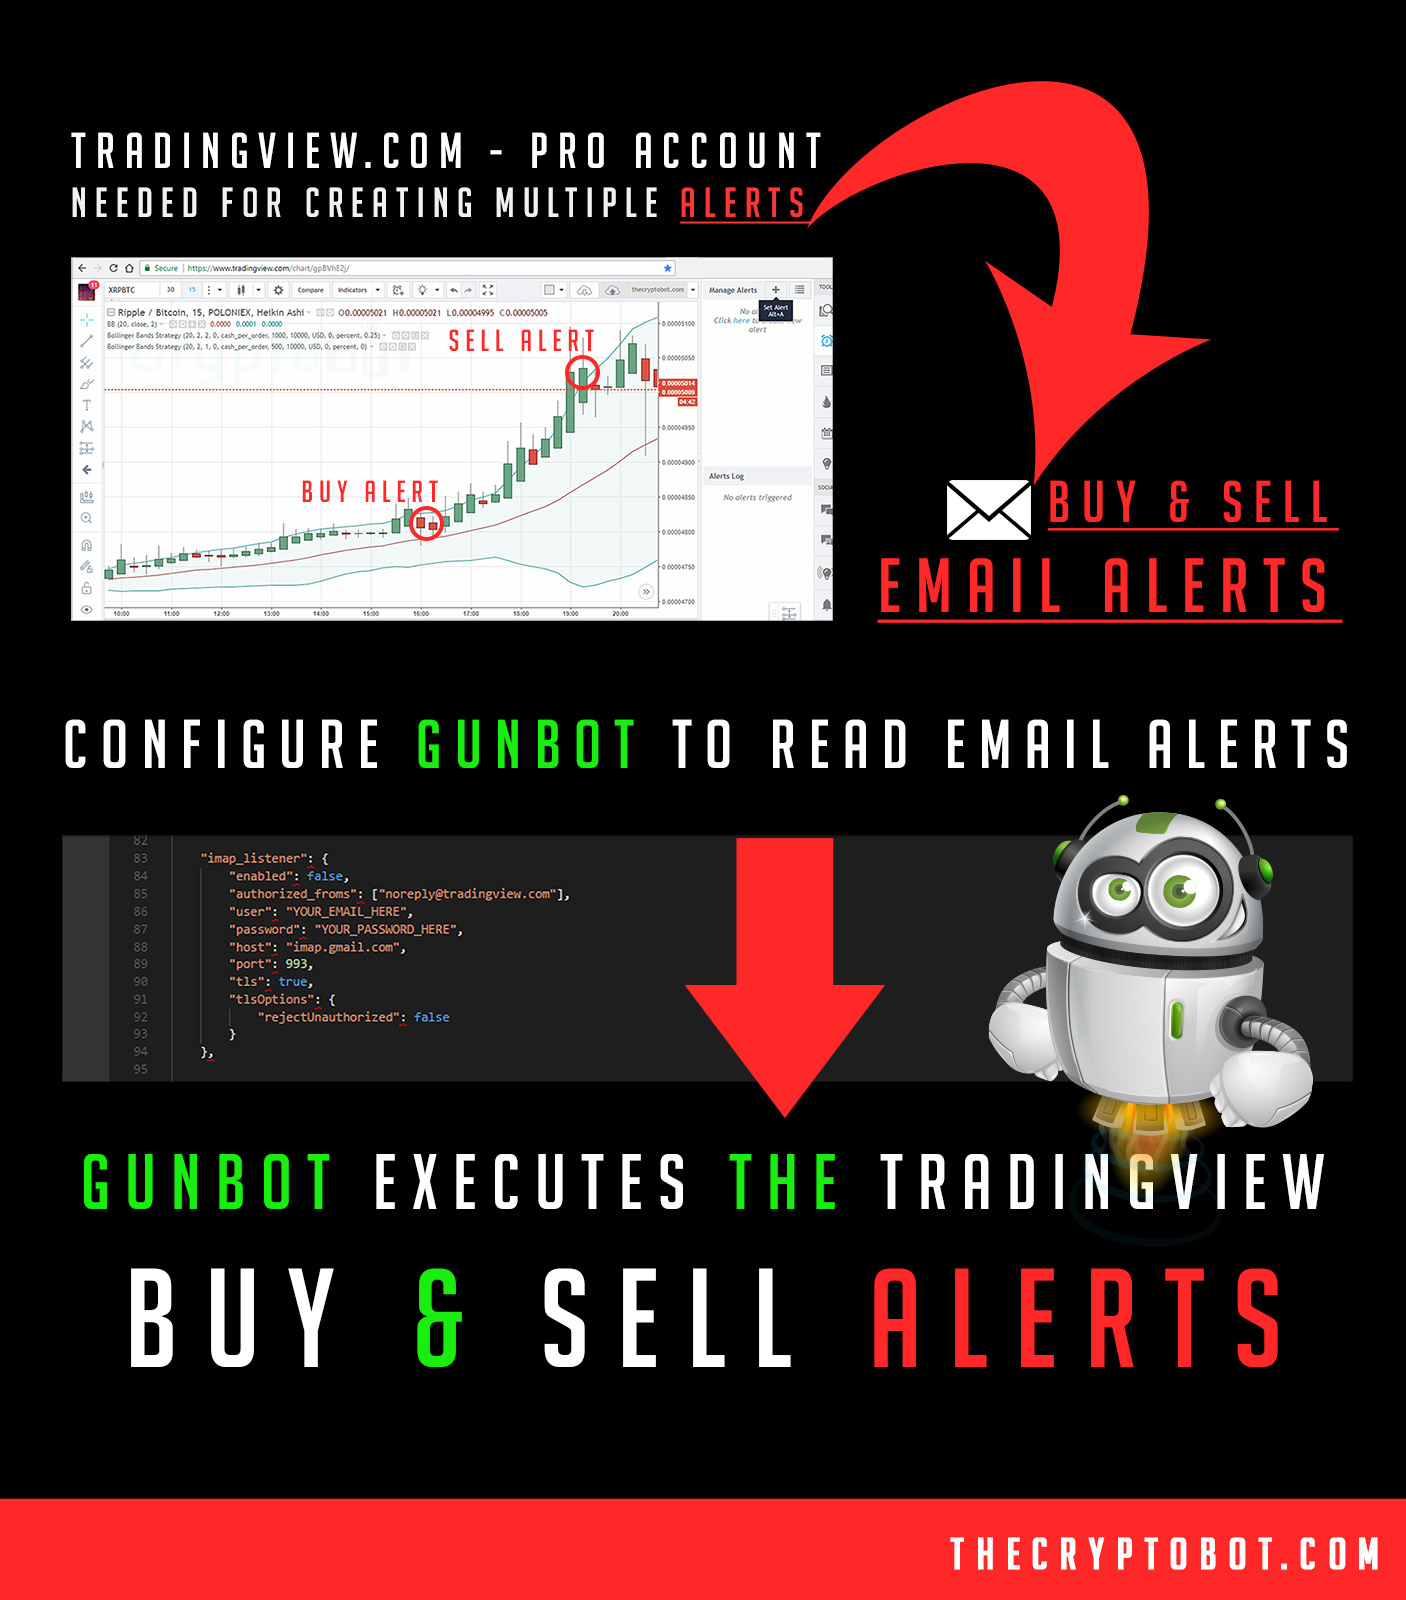 gunbot-trading-view-addon-how-it-works